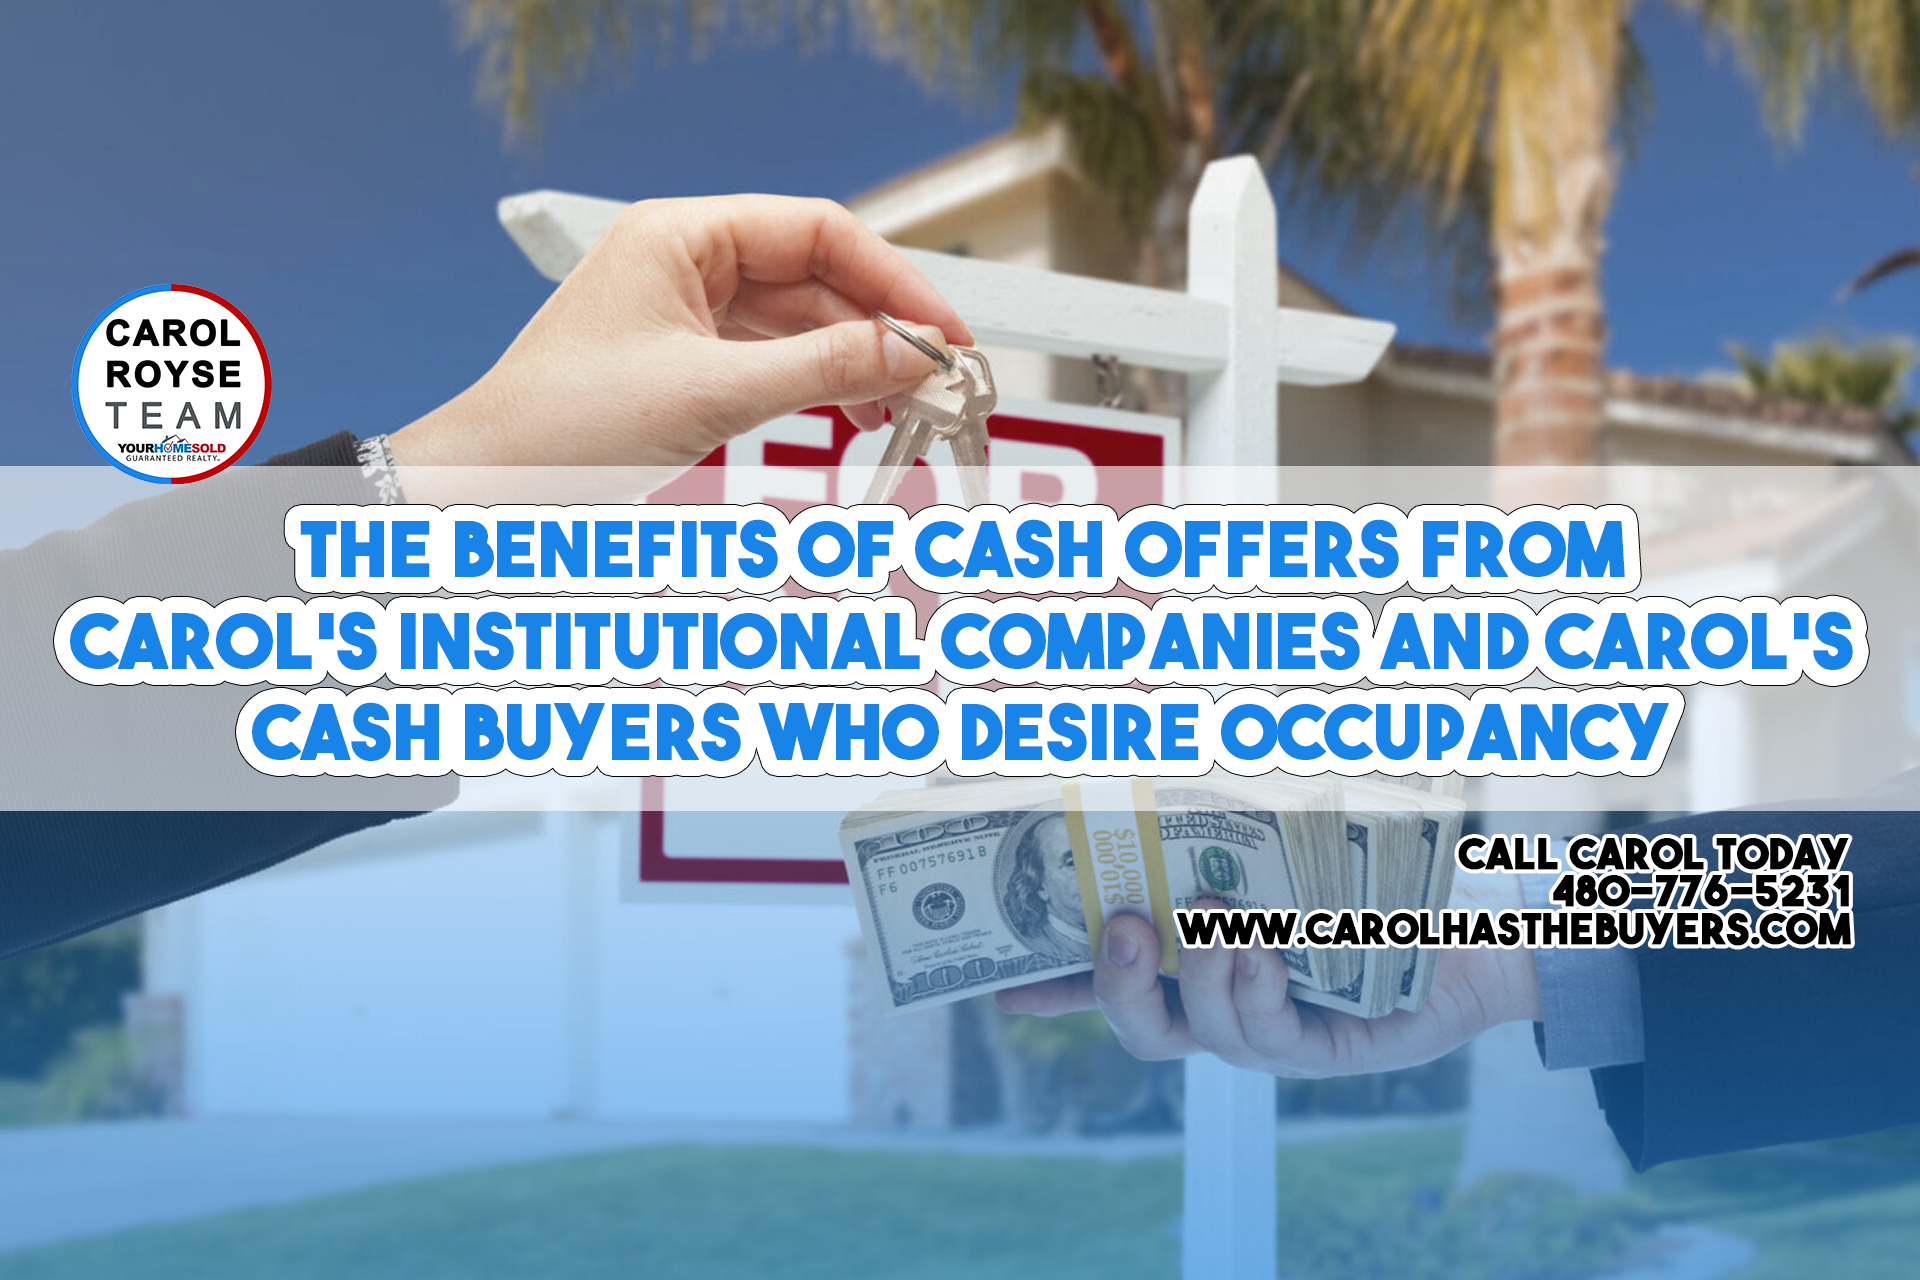 The Benefits of Cash Offers from Carol’s Institutional Companies and Carol’s Cash Buyers Who Desire Occupancy